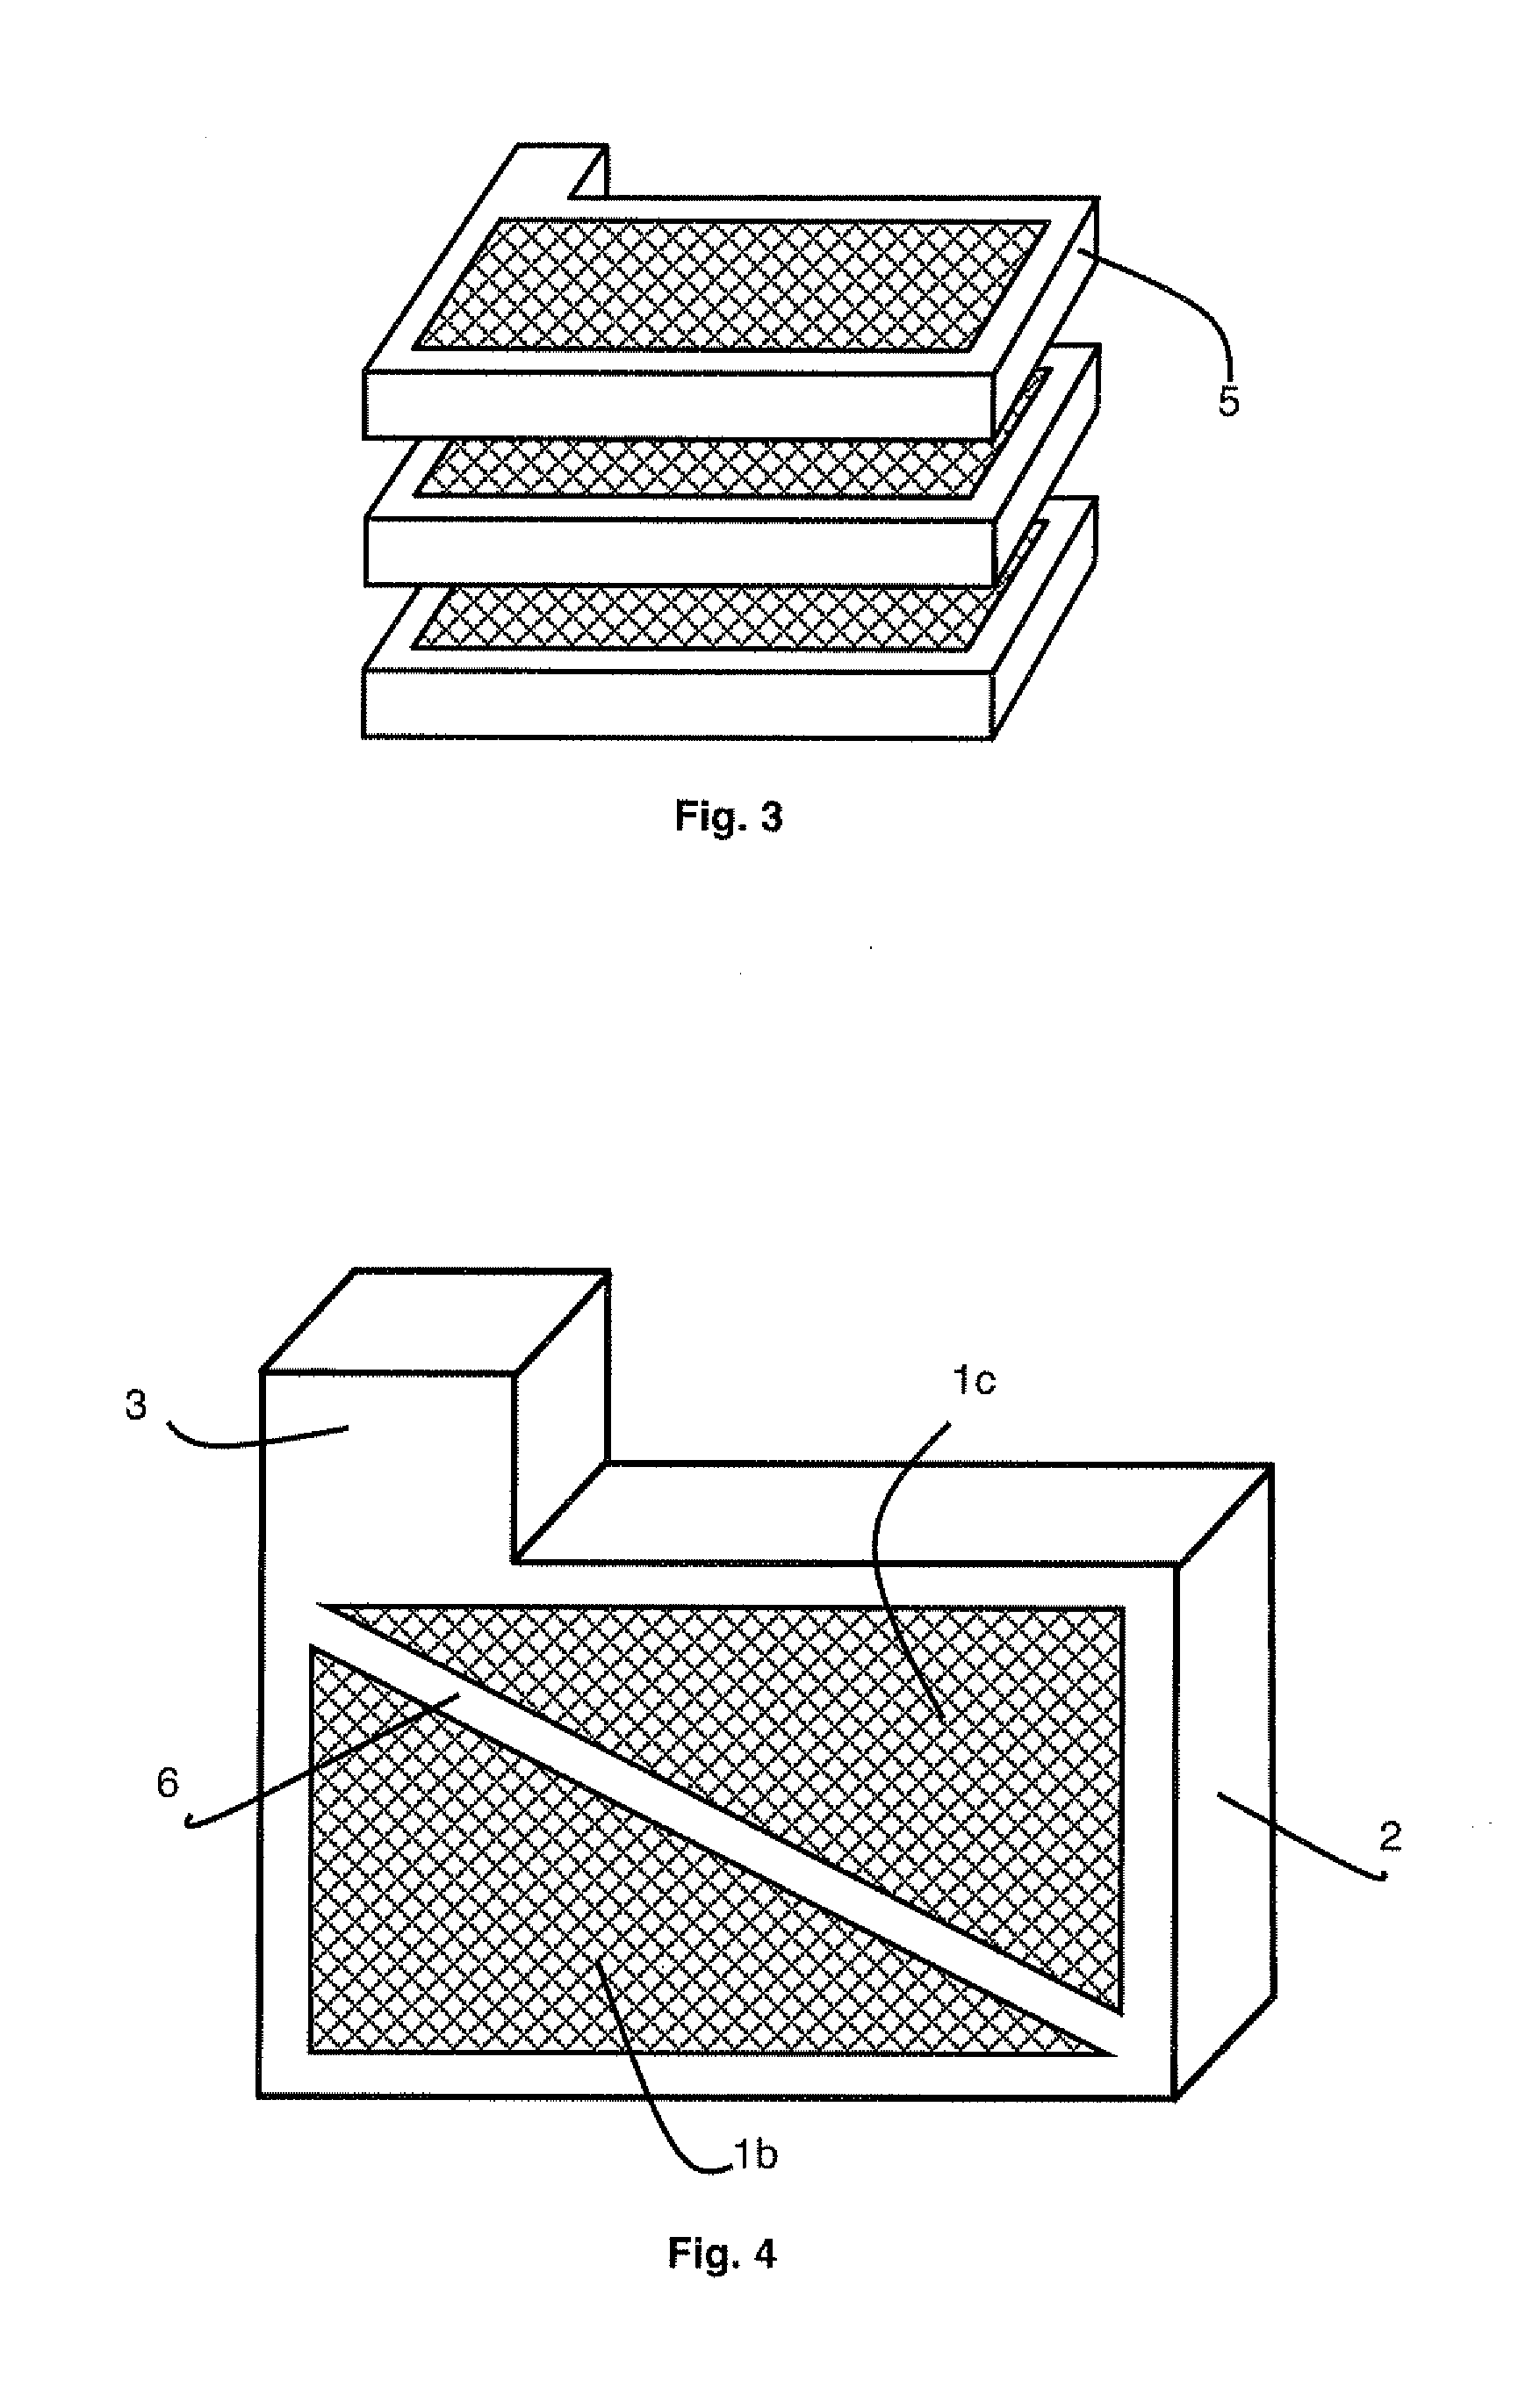 Acid-lead battery electrode comprising a network of pores passing therethrough, and production method